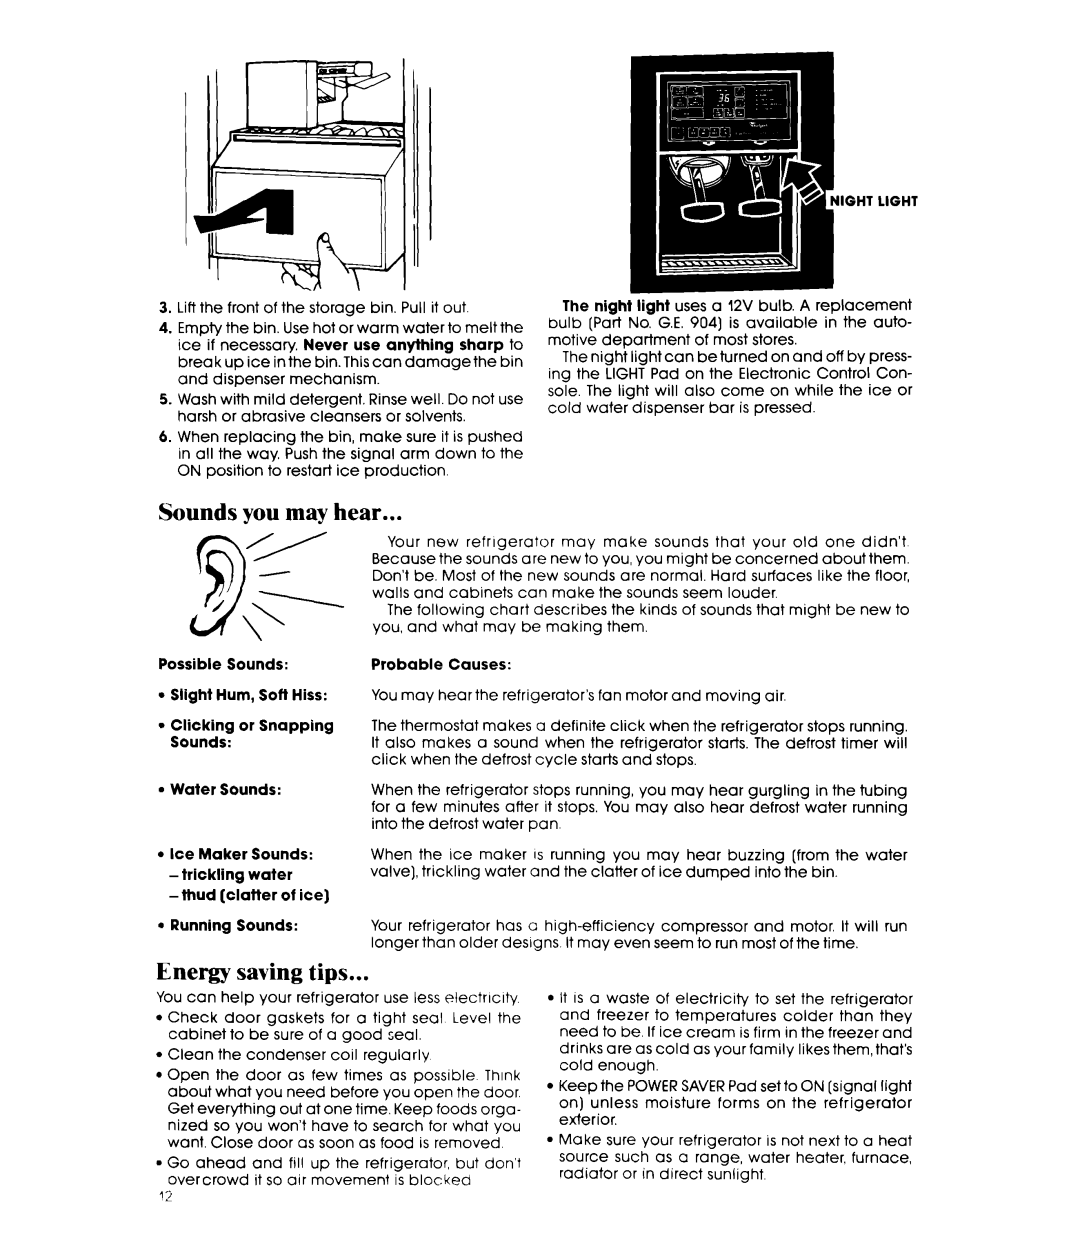 Whirlpool ED25PS manual Sounds you may hear, Energy saving tips 